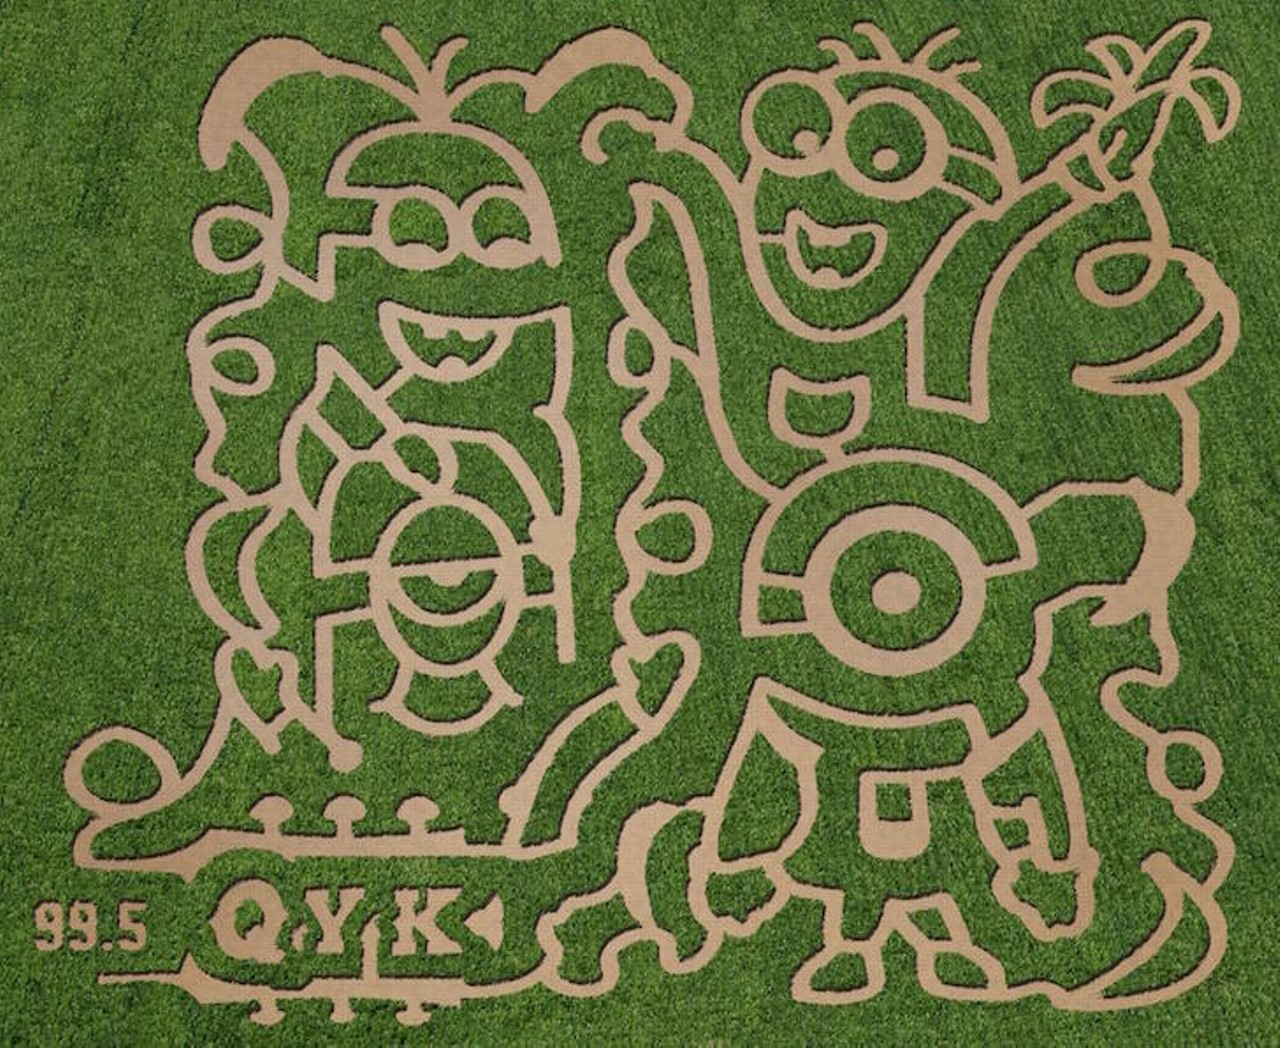 Harvestmoon Farm
15990 Stur St., Masaryktown, 800-373-4811
Veteran and first-time maze walkers are sure to have fun at Harvestmoon&#146;s events on Saturdays and Sundays from Sept. 30 - Nov. 5. This year the maze will feature an interactive MAiZE-O-Poly game where guests who complete it successfully will have a chance to become farmer of the year. For $11.95, you can also check out the pumpkins at the farm&#146;s patch, ride hill slides, play cornball games and much more.
Photo via Harvestmoon Farm/Facebook